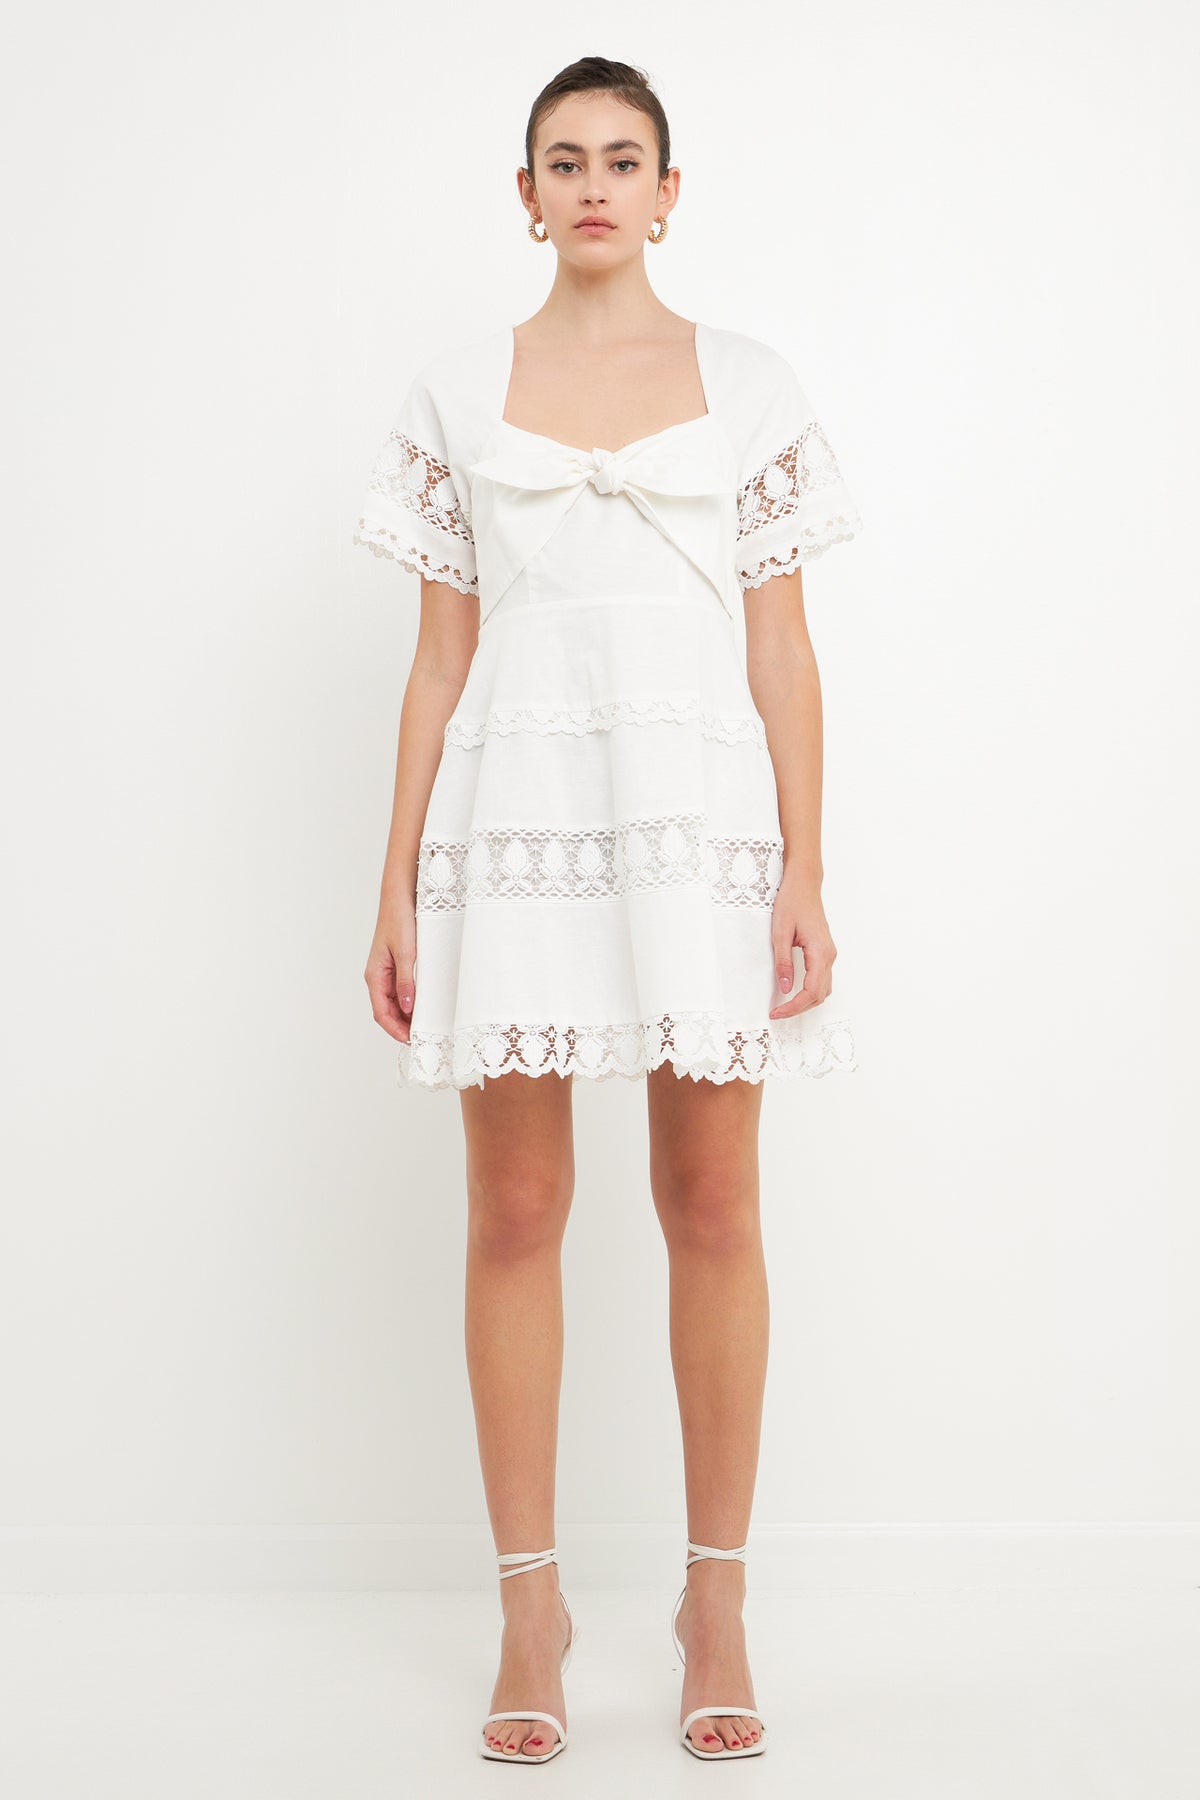 ENDLESS ROSE - Lace Trim Mini Dress with Front Bow - DRESSES available at Objectrare